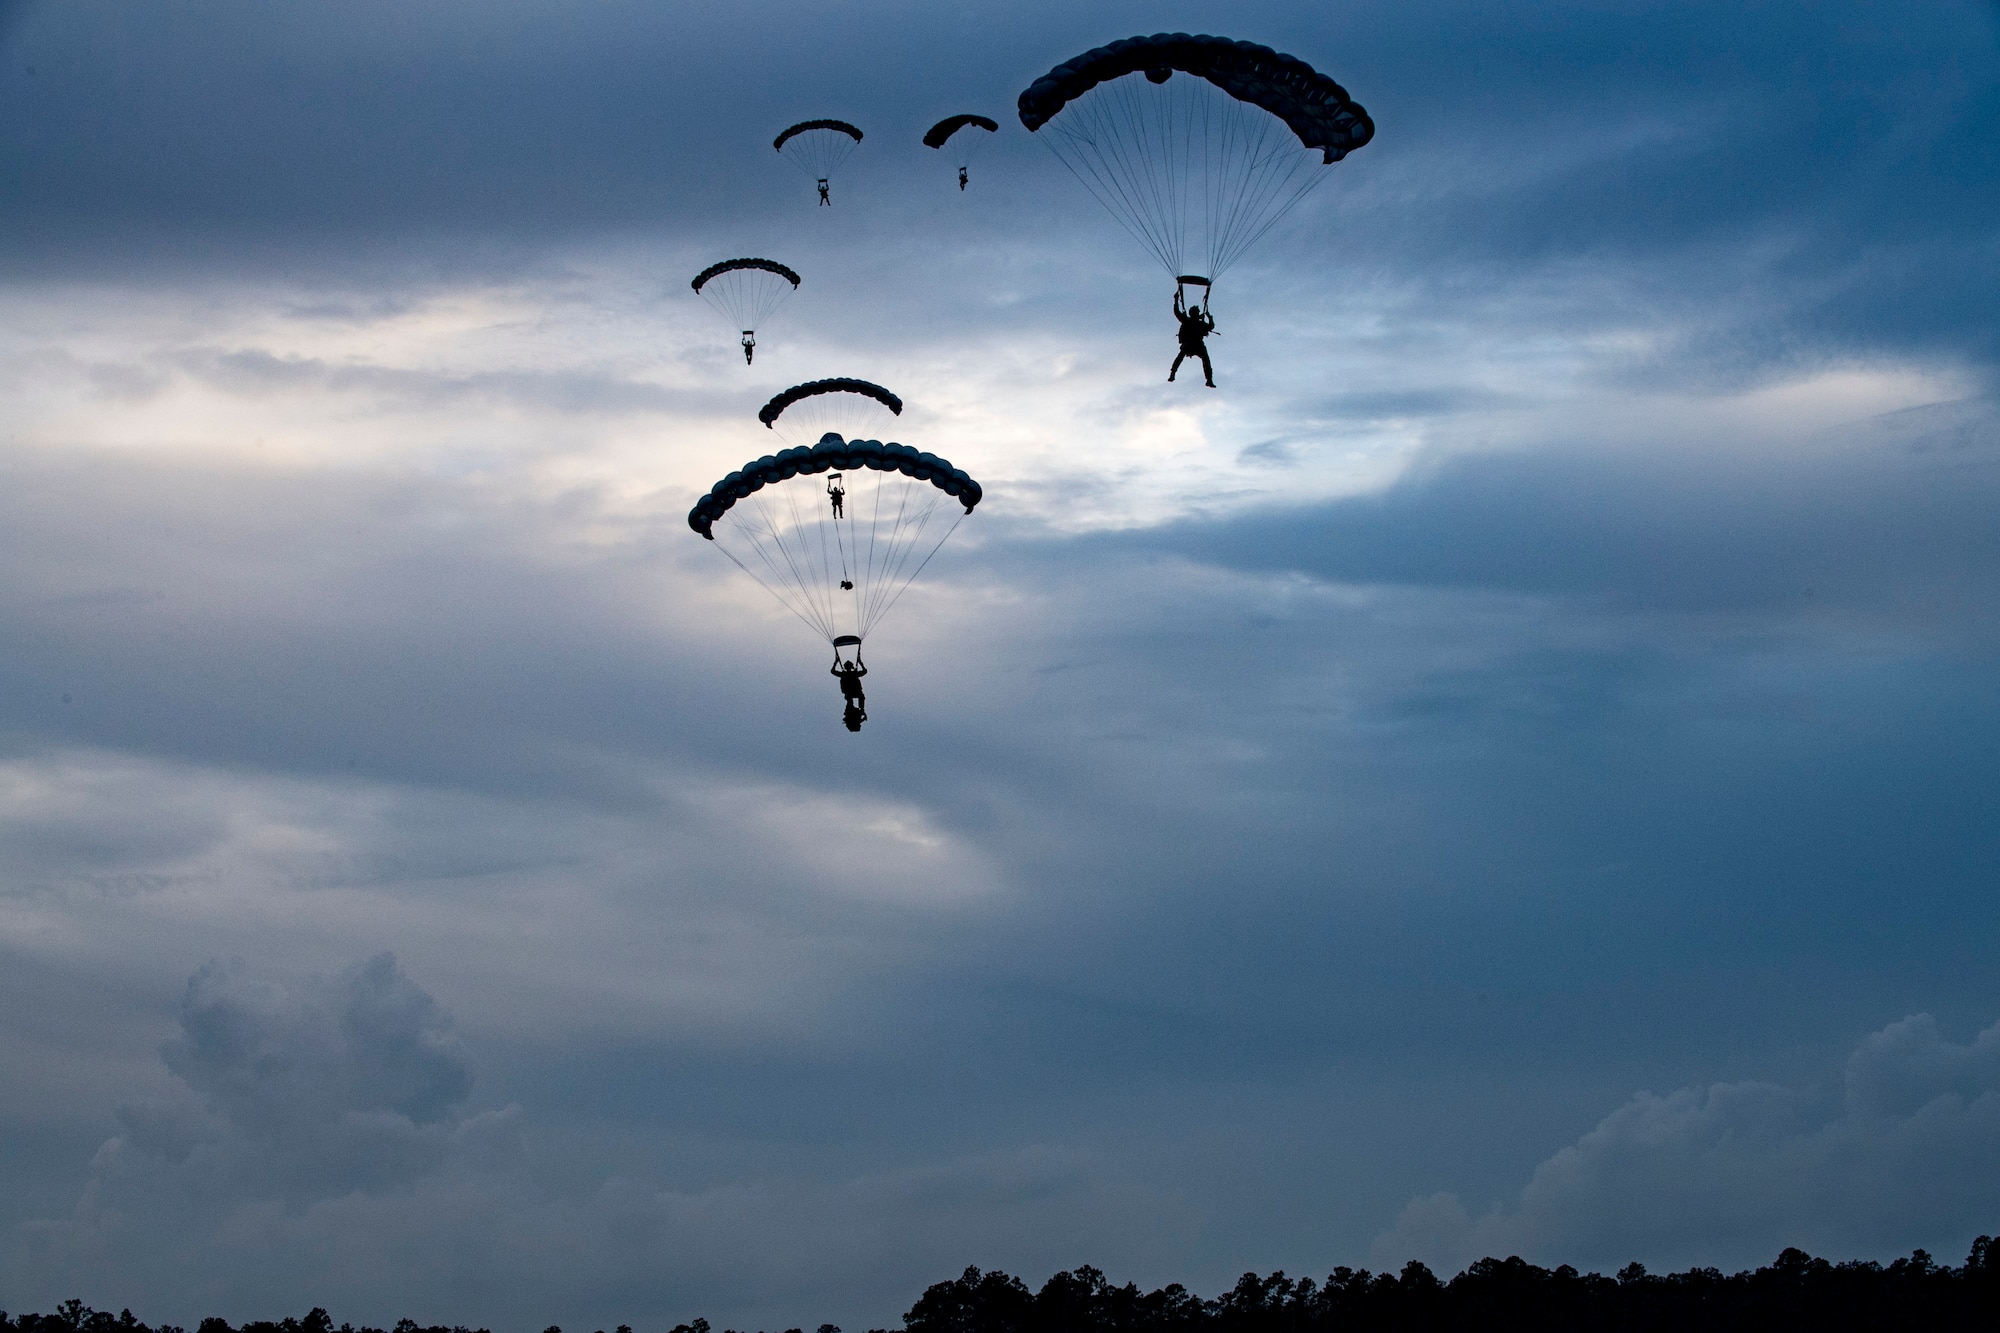 Pararescuemen from the 38th Rescue Squadron parachute towards the ground during a rescue exercise, June 21, 2017, at Bemiss Field landing zone, Ga. The Air Force Research Laboratory from Wright-Patterson Air Force Base, Ohio and the Baltimore U.S. Air Force Center for Sustainment of Trauma and Readiness Skills, observed Moody's Combat Search and Rescue aeromedical patient processes and survival kit technology, in hopes of reducing risks to improve the overall Air Force mission. (U.S. Air Force photo by Airman 1st Class Daniel Snider)